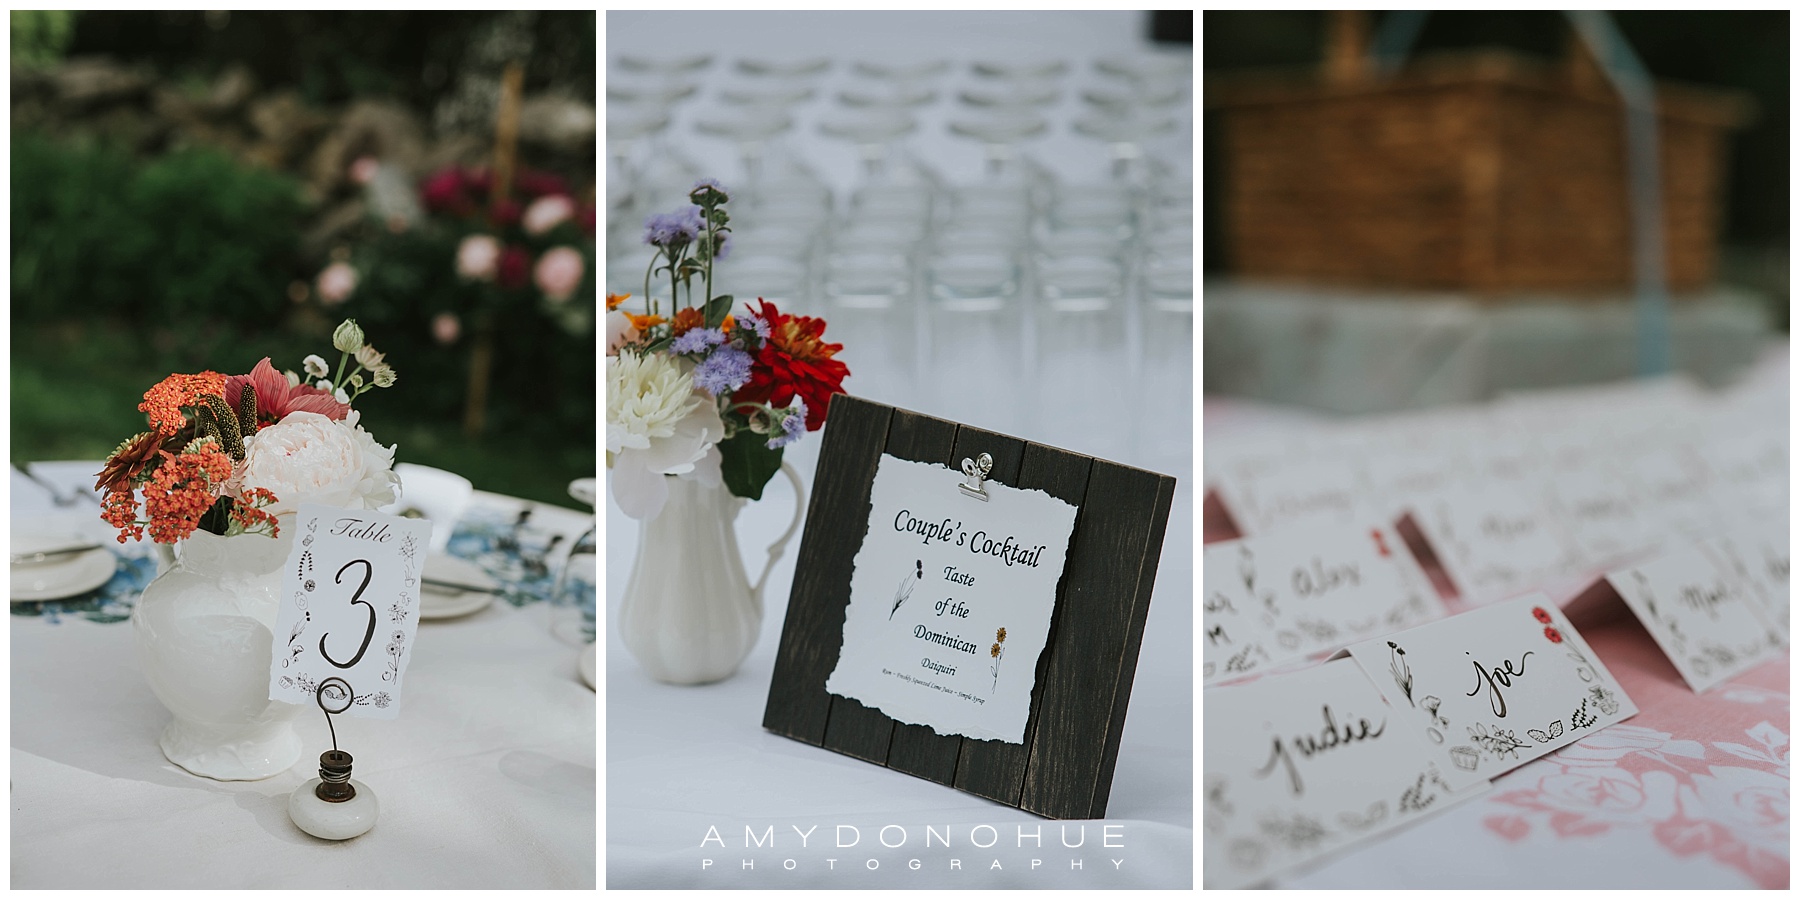 Wedding Day Details © Amy Donohue Photography